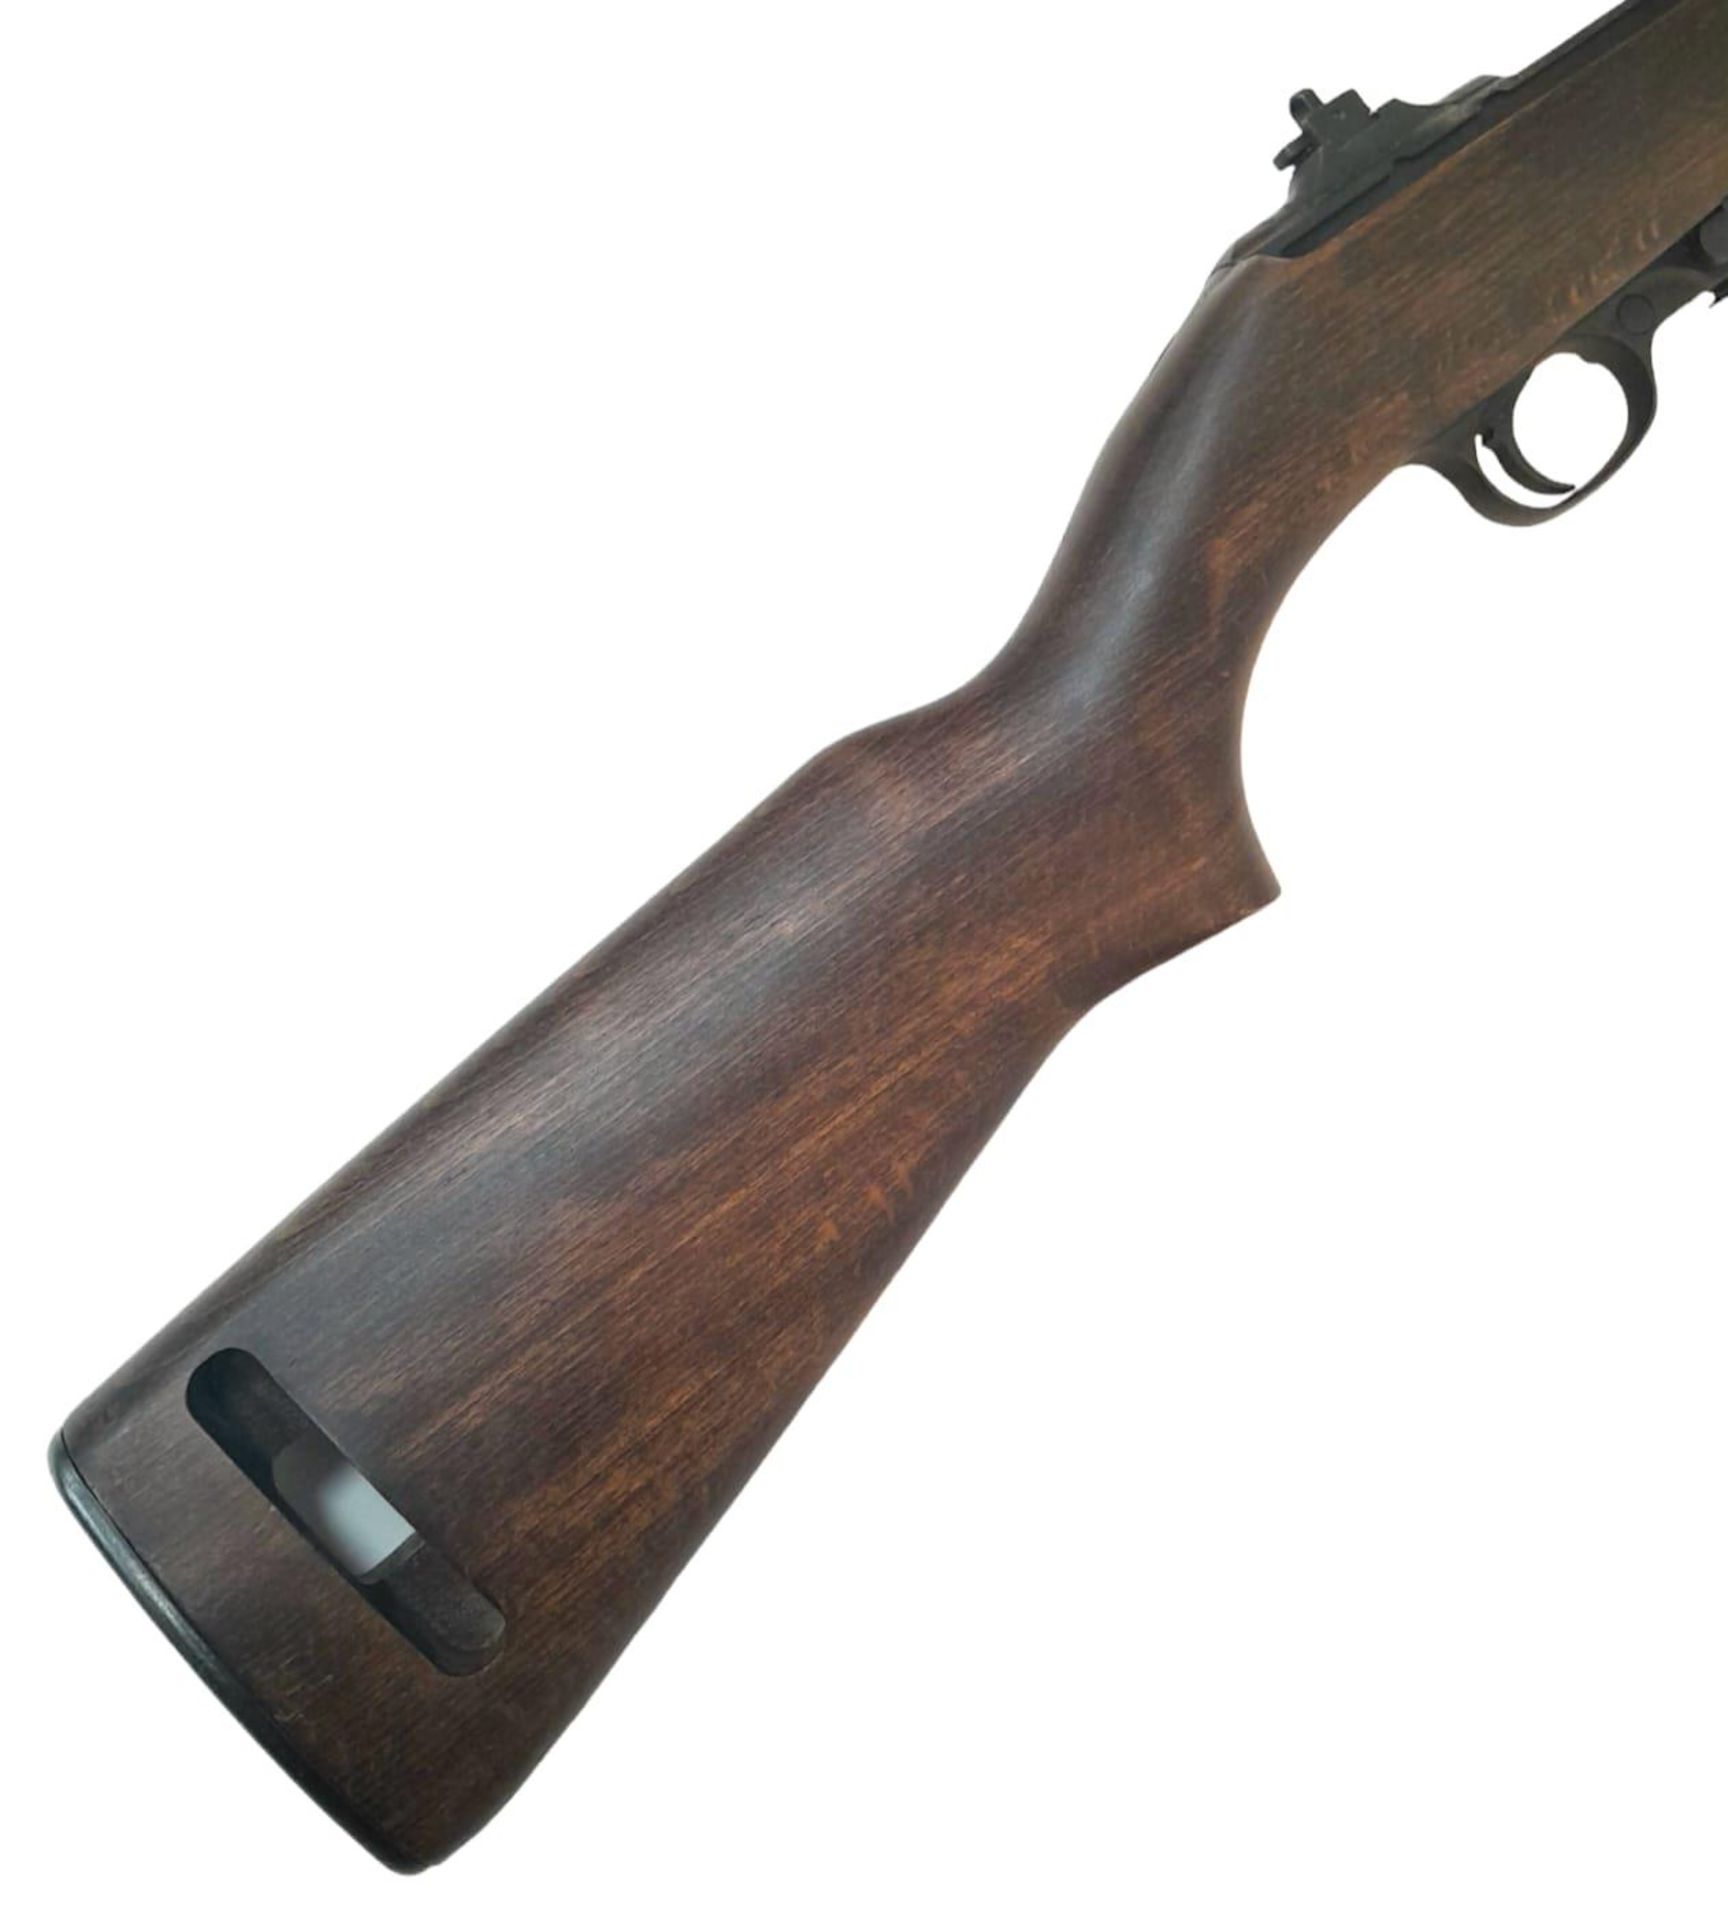 A Deactivated Winchester M1 Carbine Self Loading Rifle. Used by the USA in warfare from 1942-73 this - Bild 6 aus 12